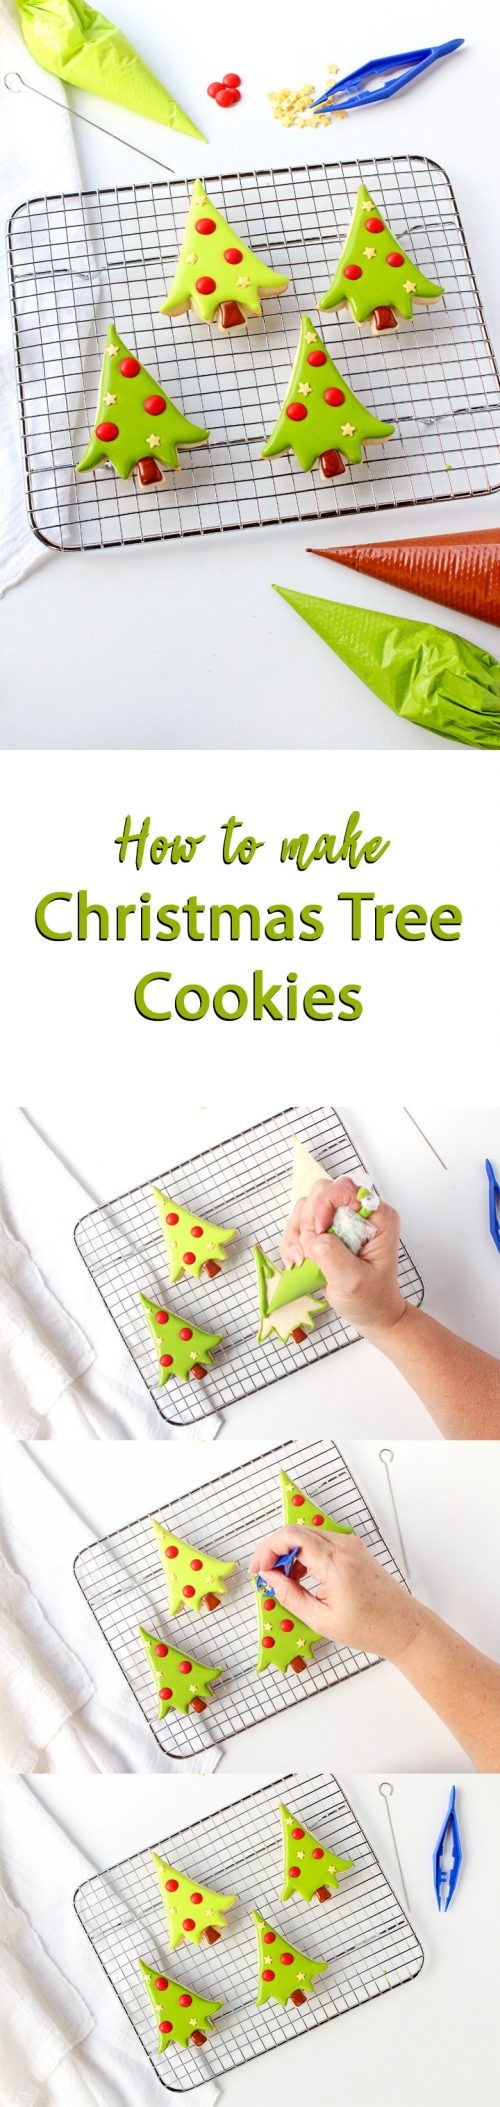 How to Make Adorable Little Christmas Tree Cookies | The Bearfoot Baker